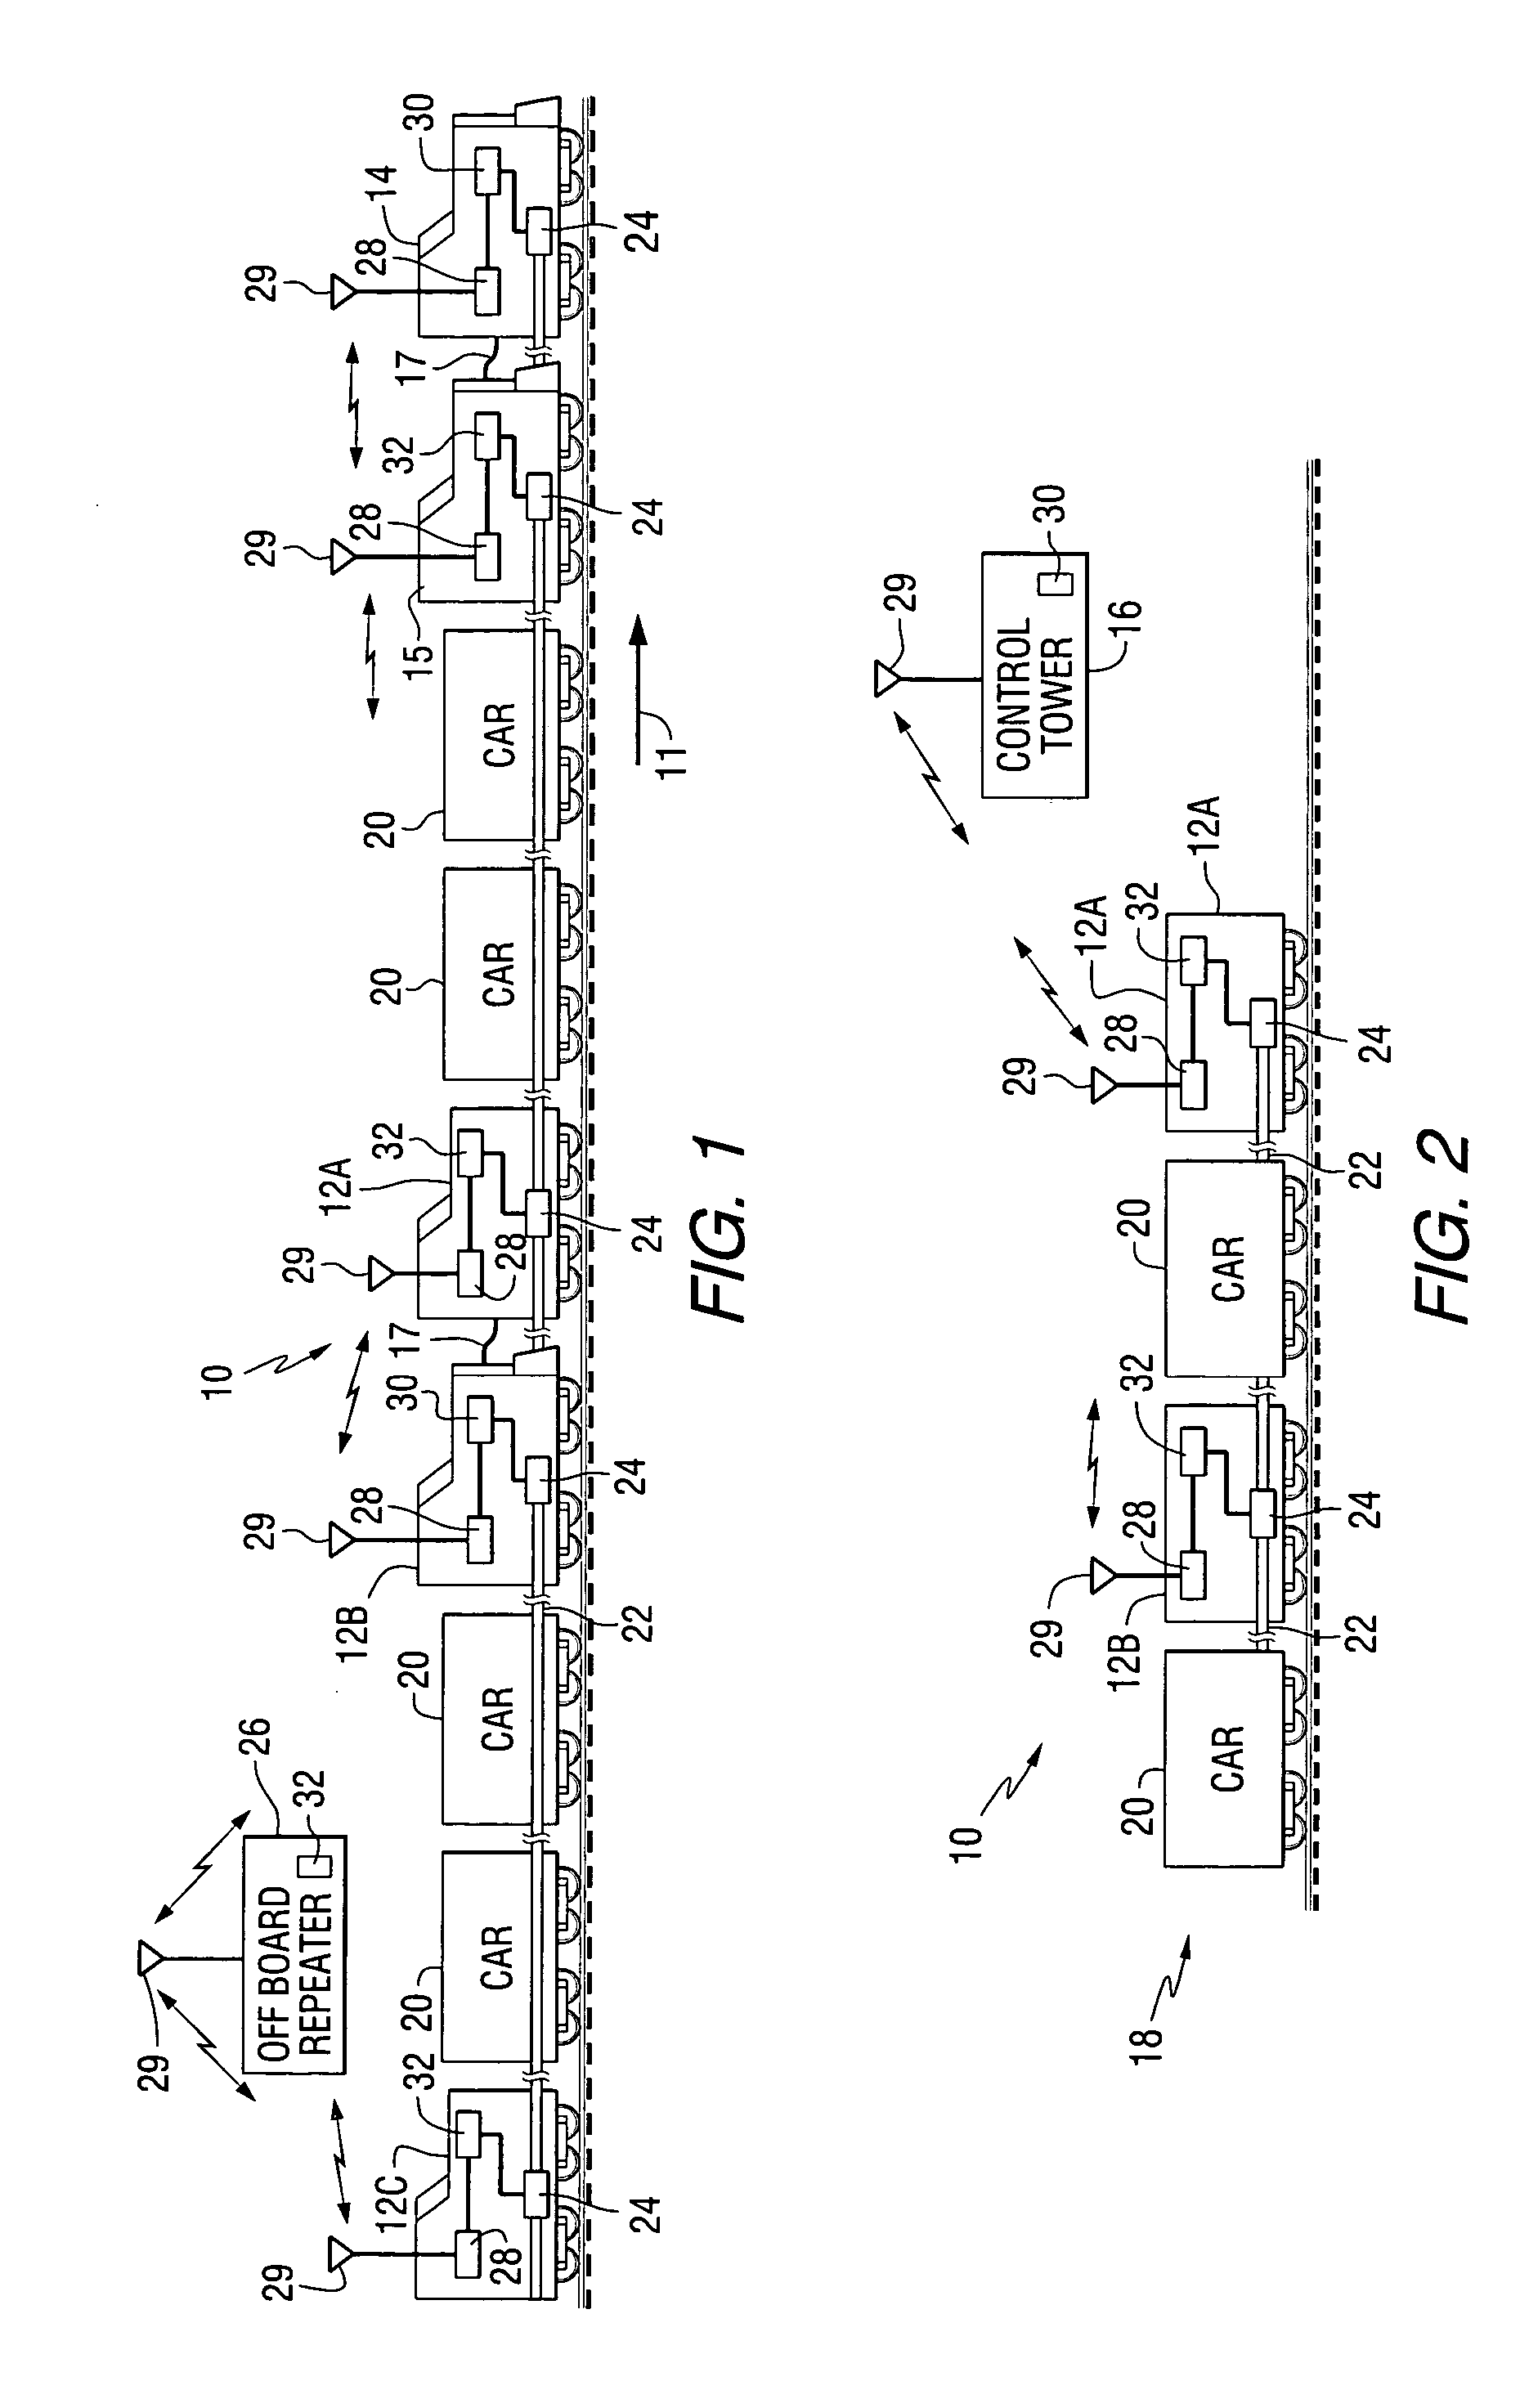 On-board message repeater for railroad train communications system